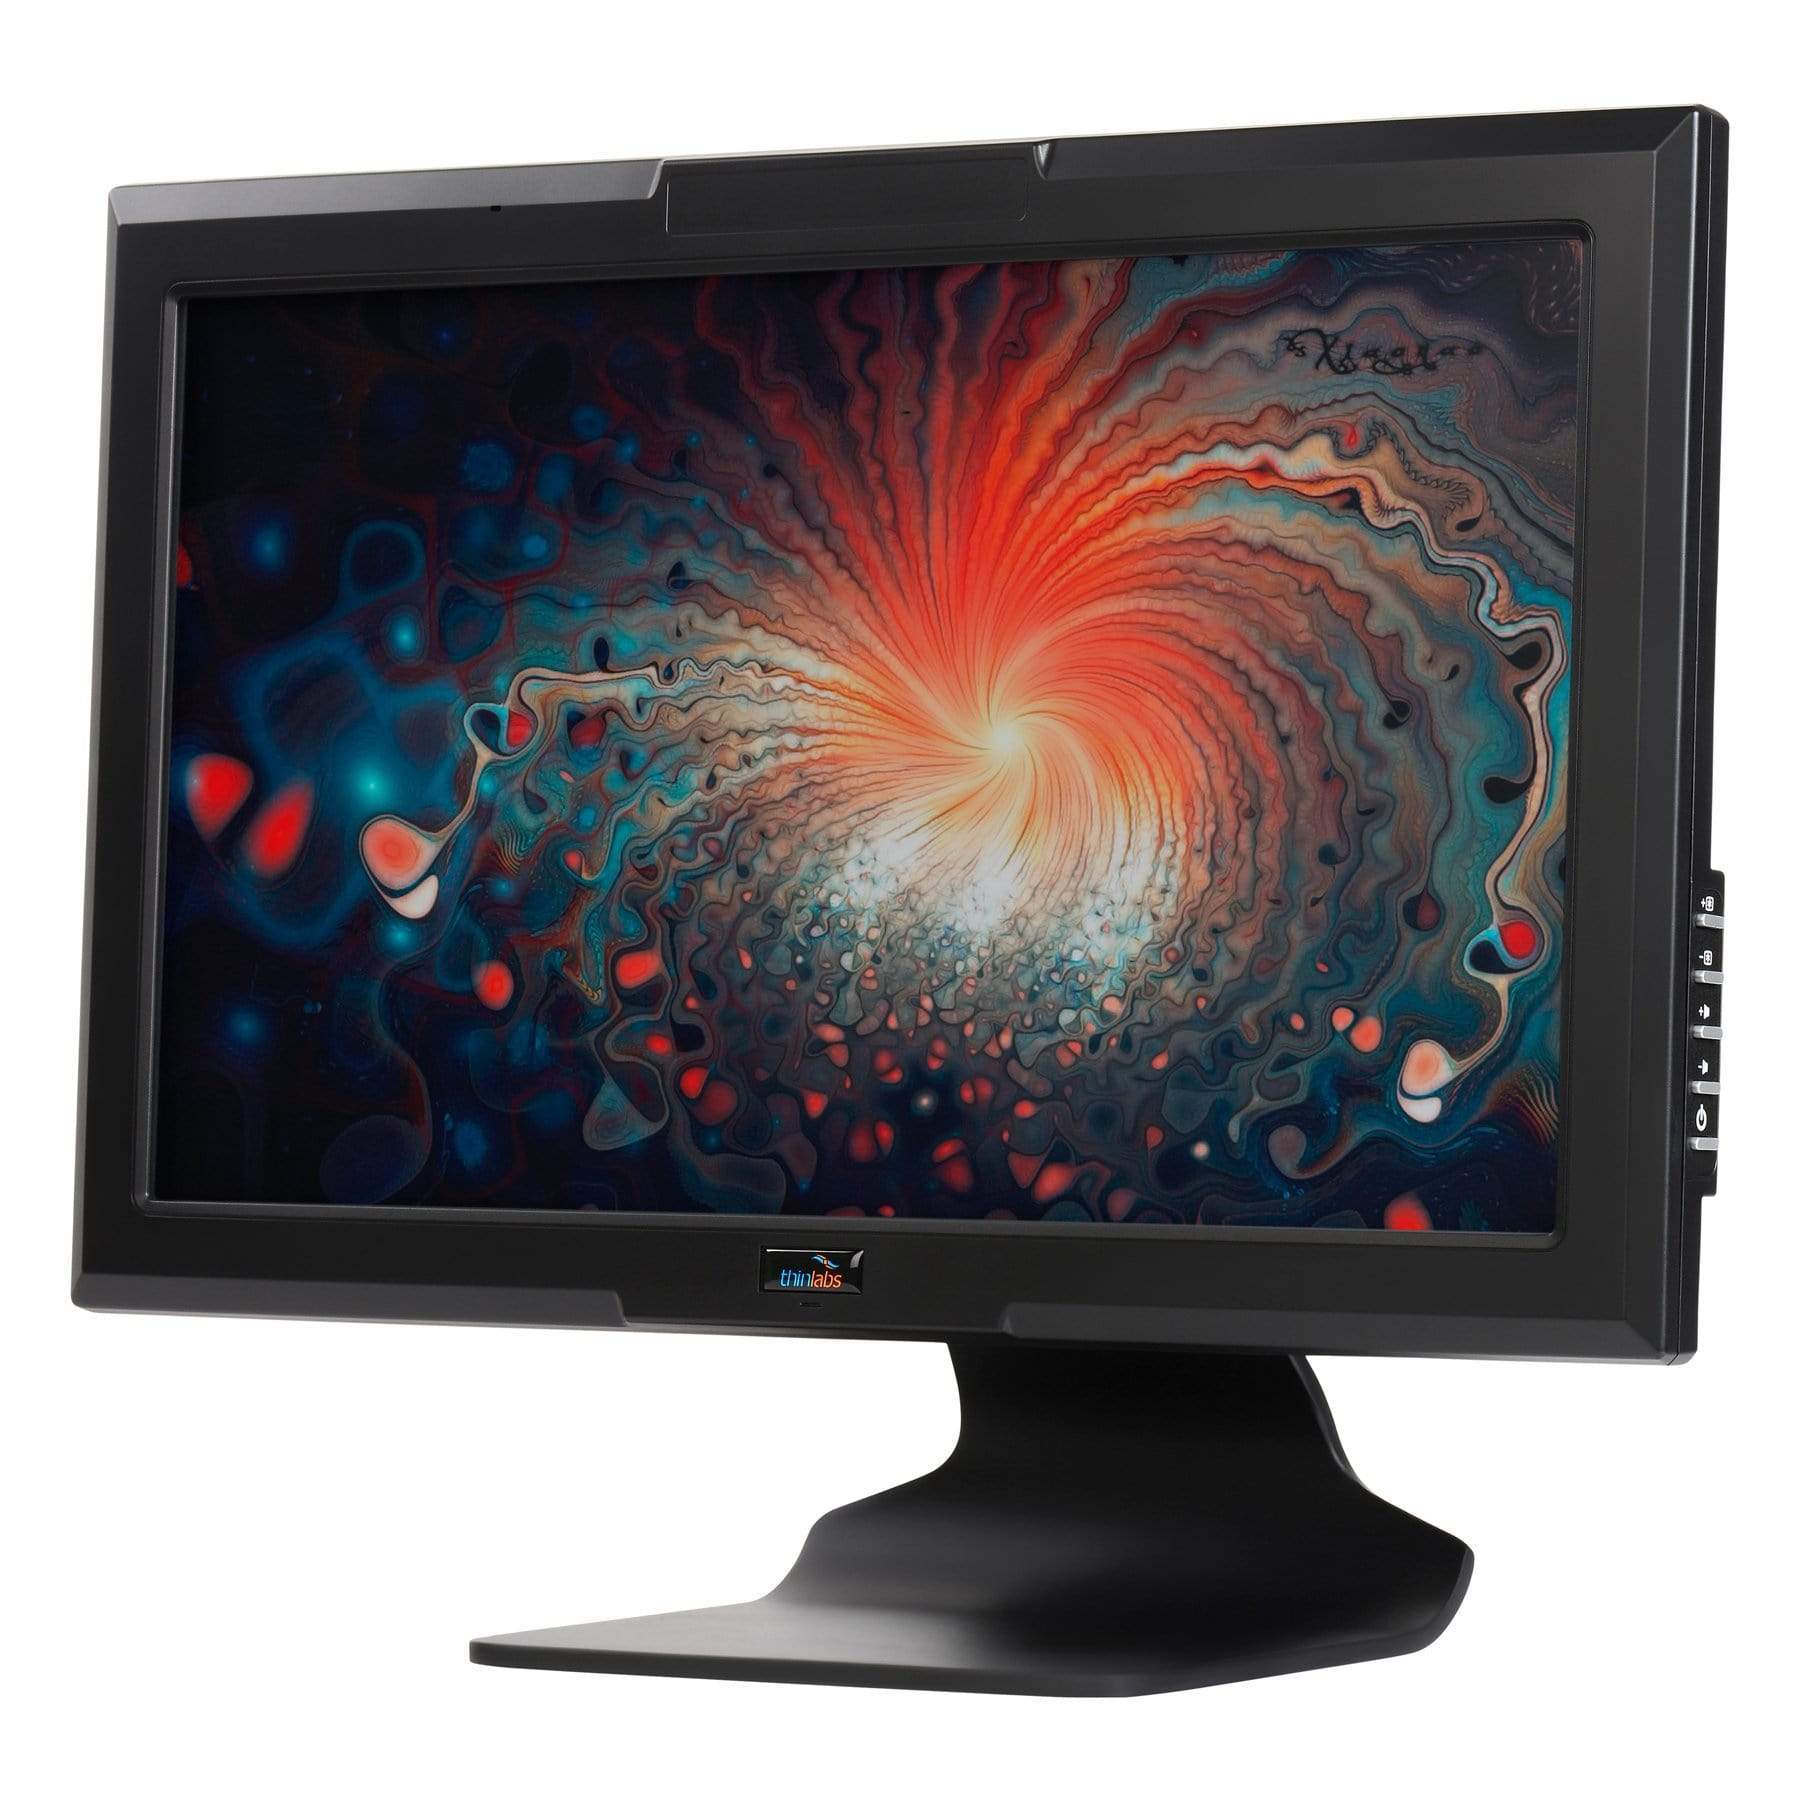 PoE Texas Display HELIOS All-in-One PoE+ pCAP Touchscreen Computer - 22" Desk Top Base, 8GB DDR3 RAM, 128GB mSATA